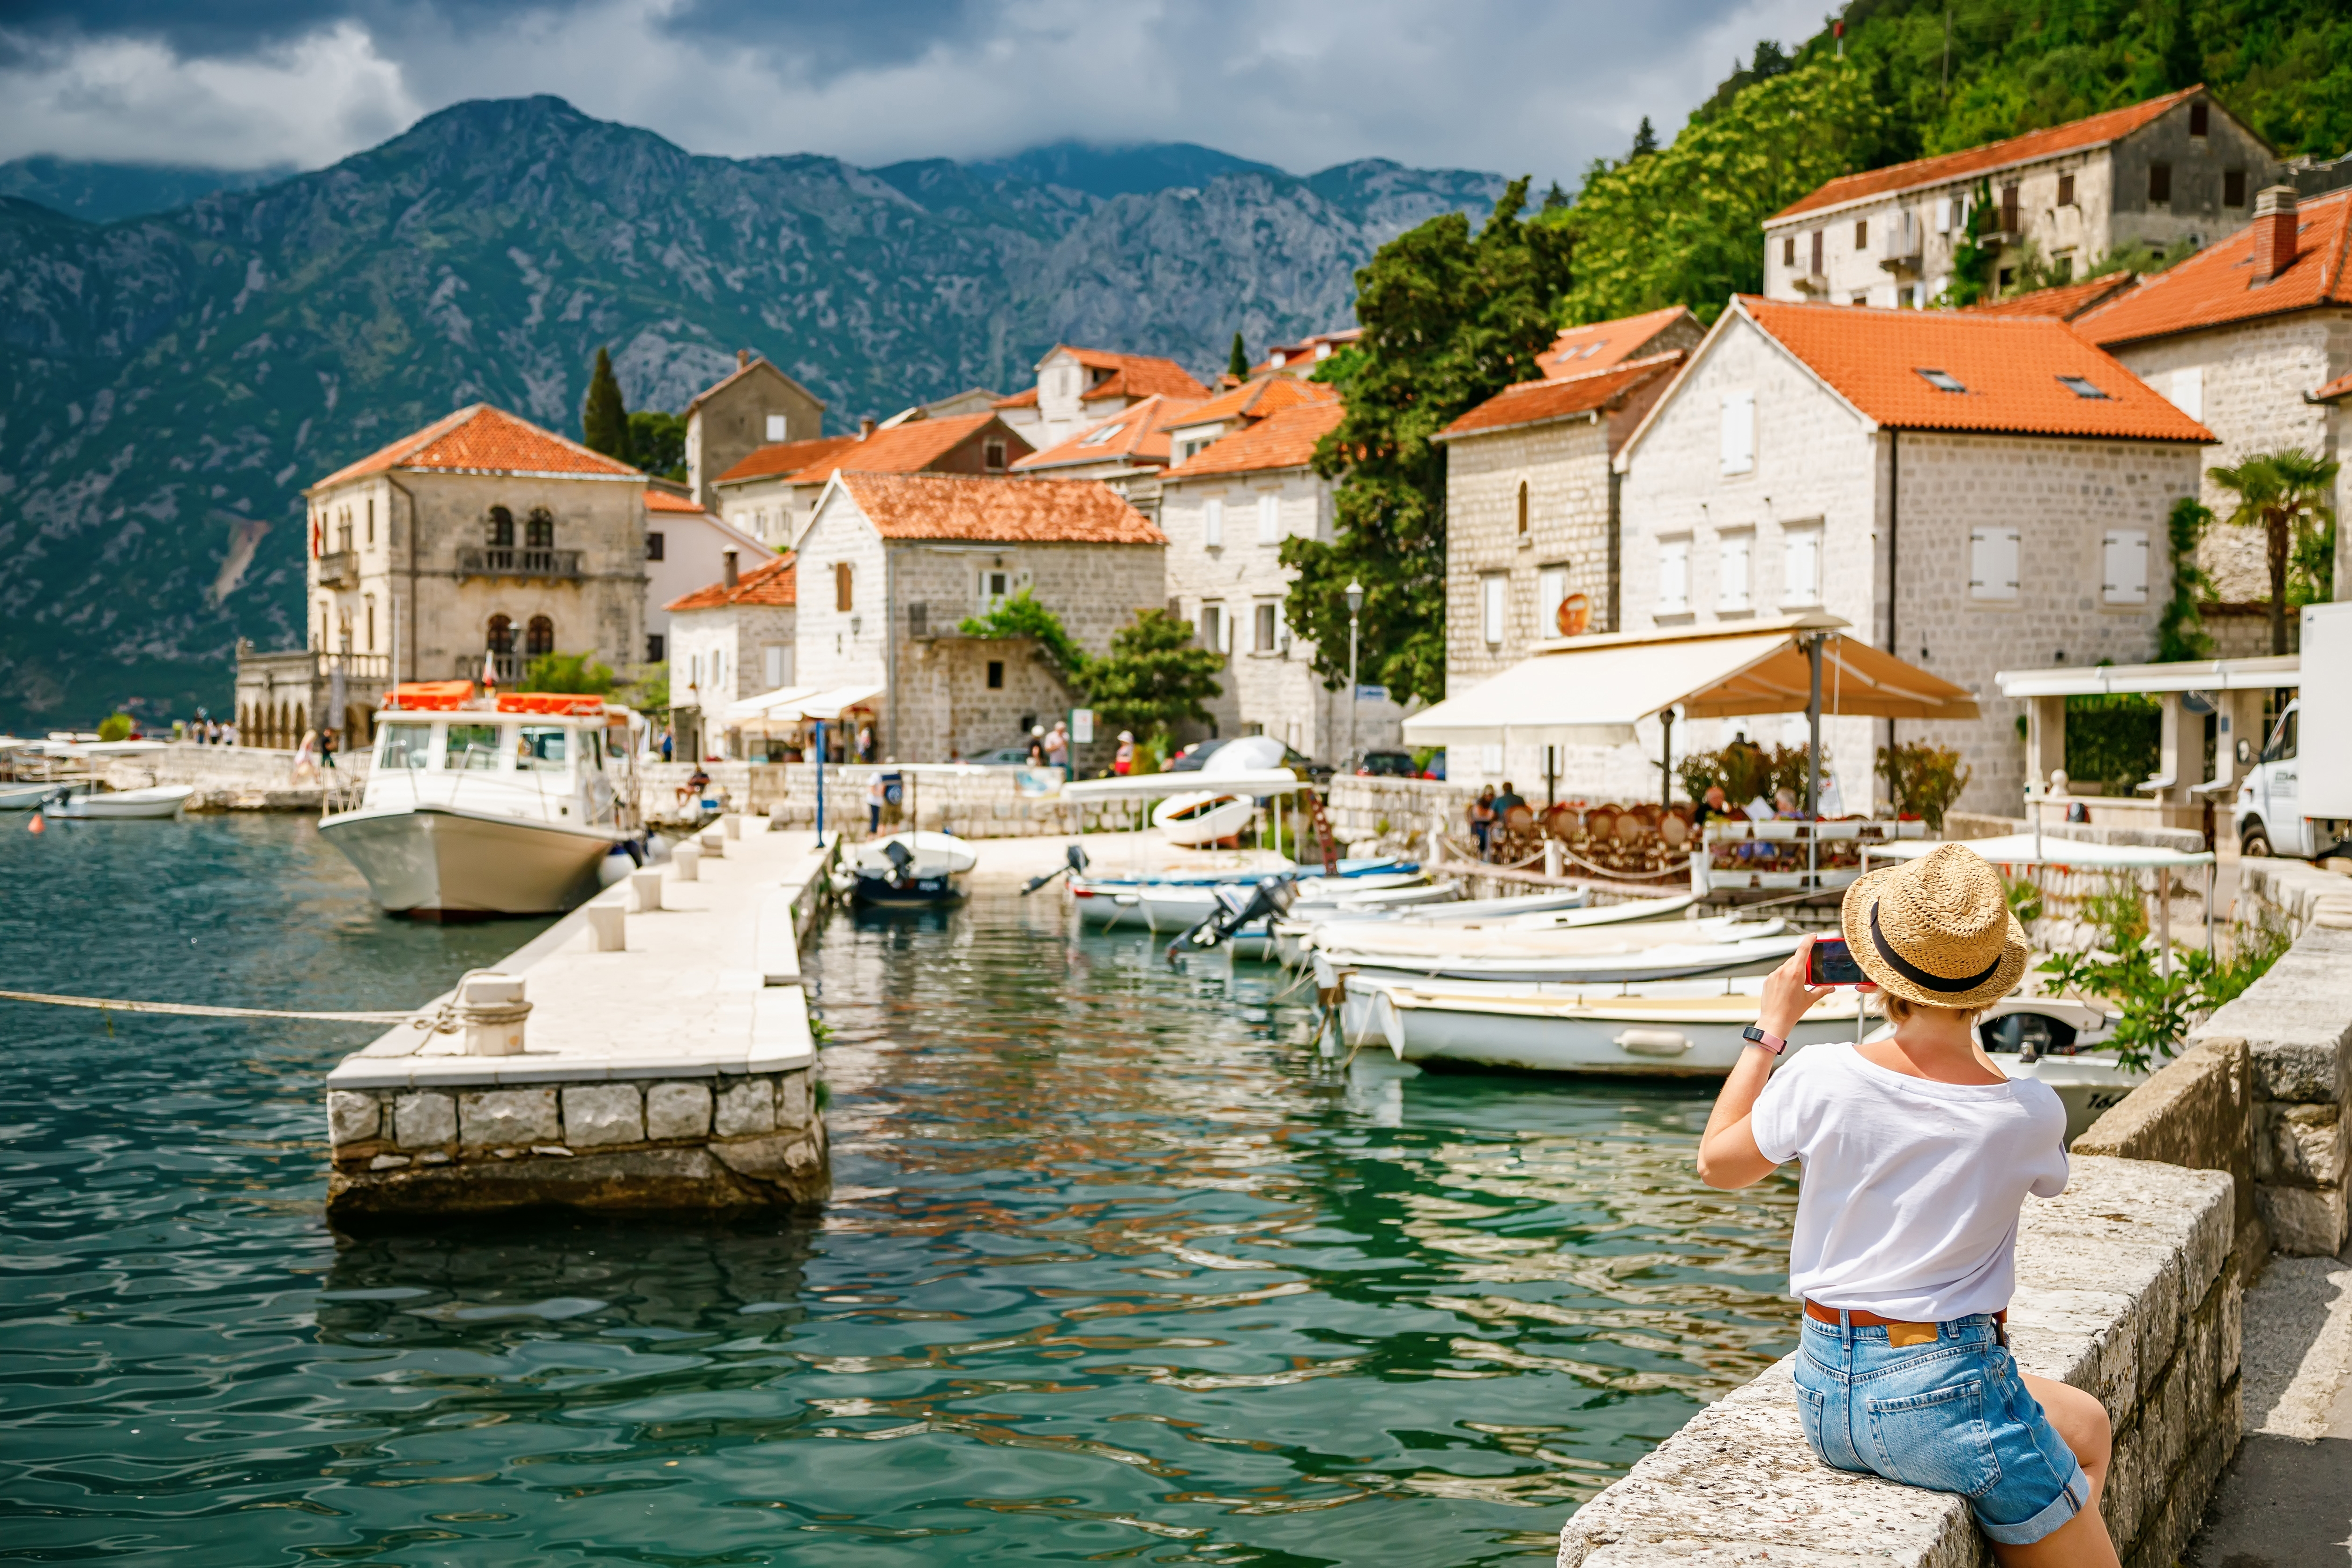 Reviews about life in Montenegro and permanent residence status